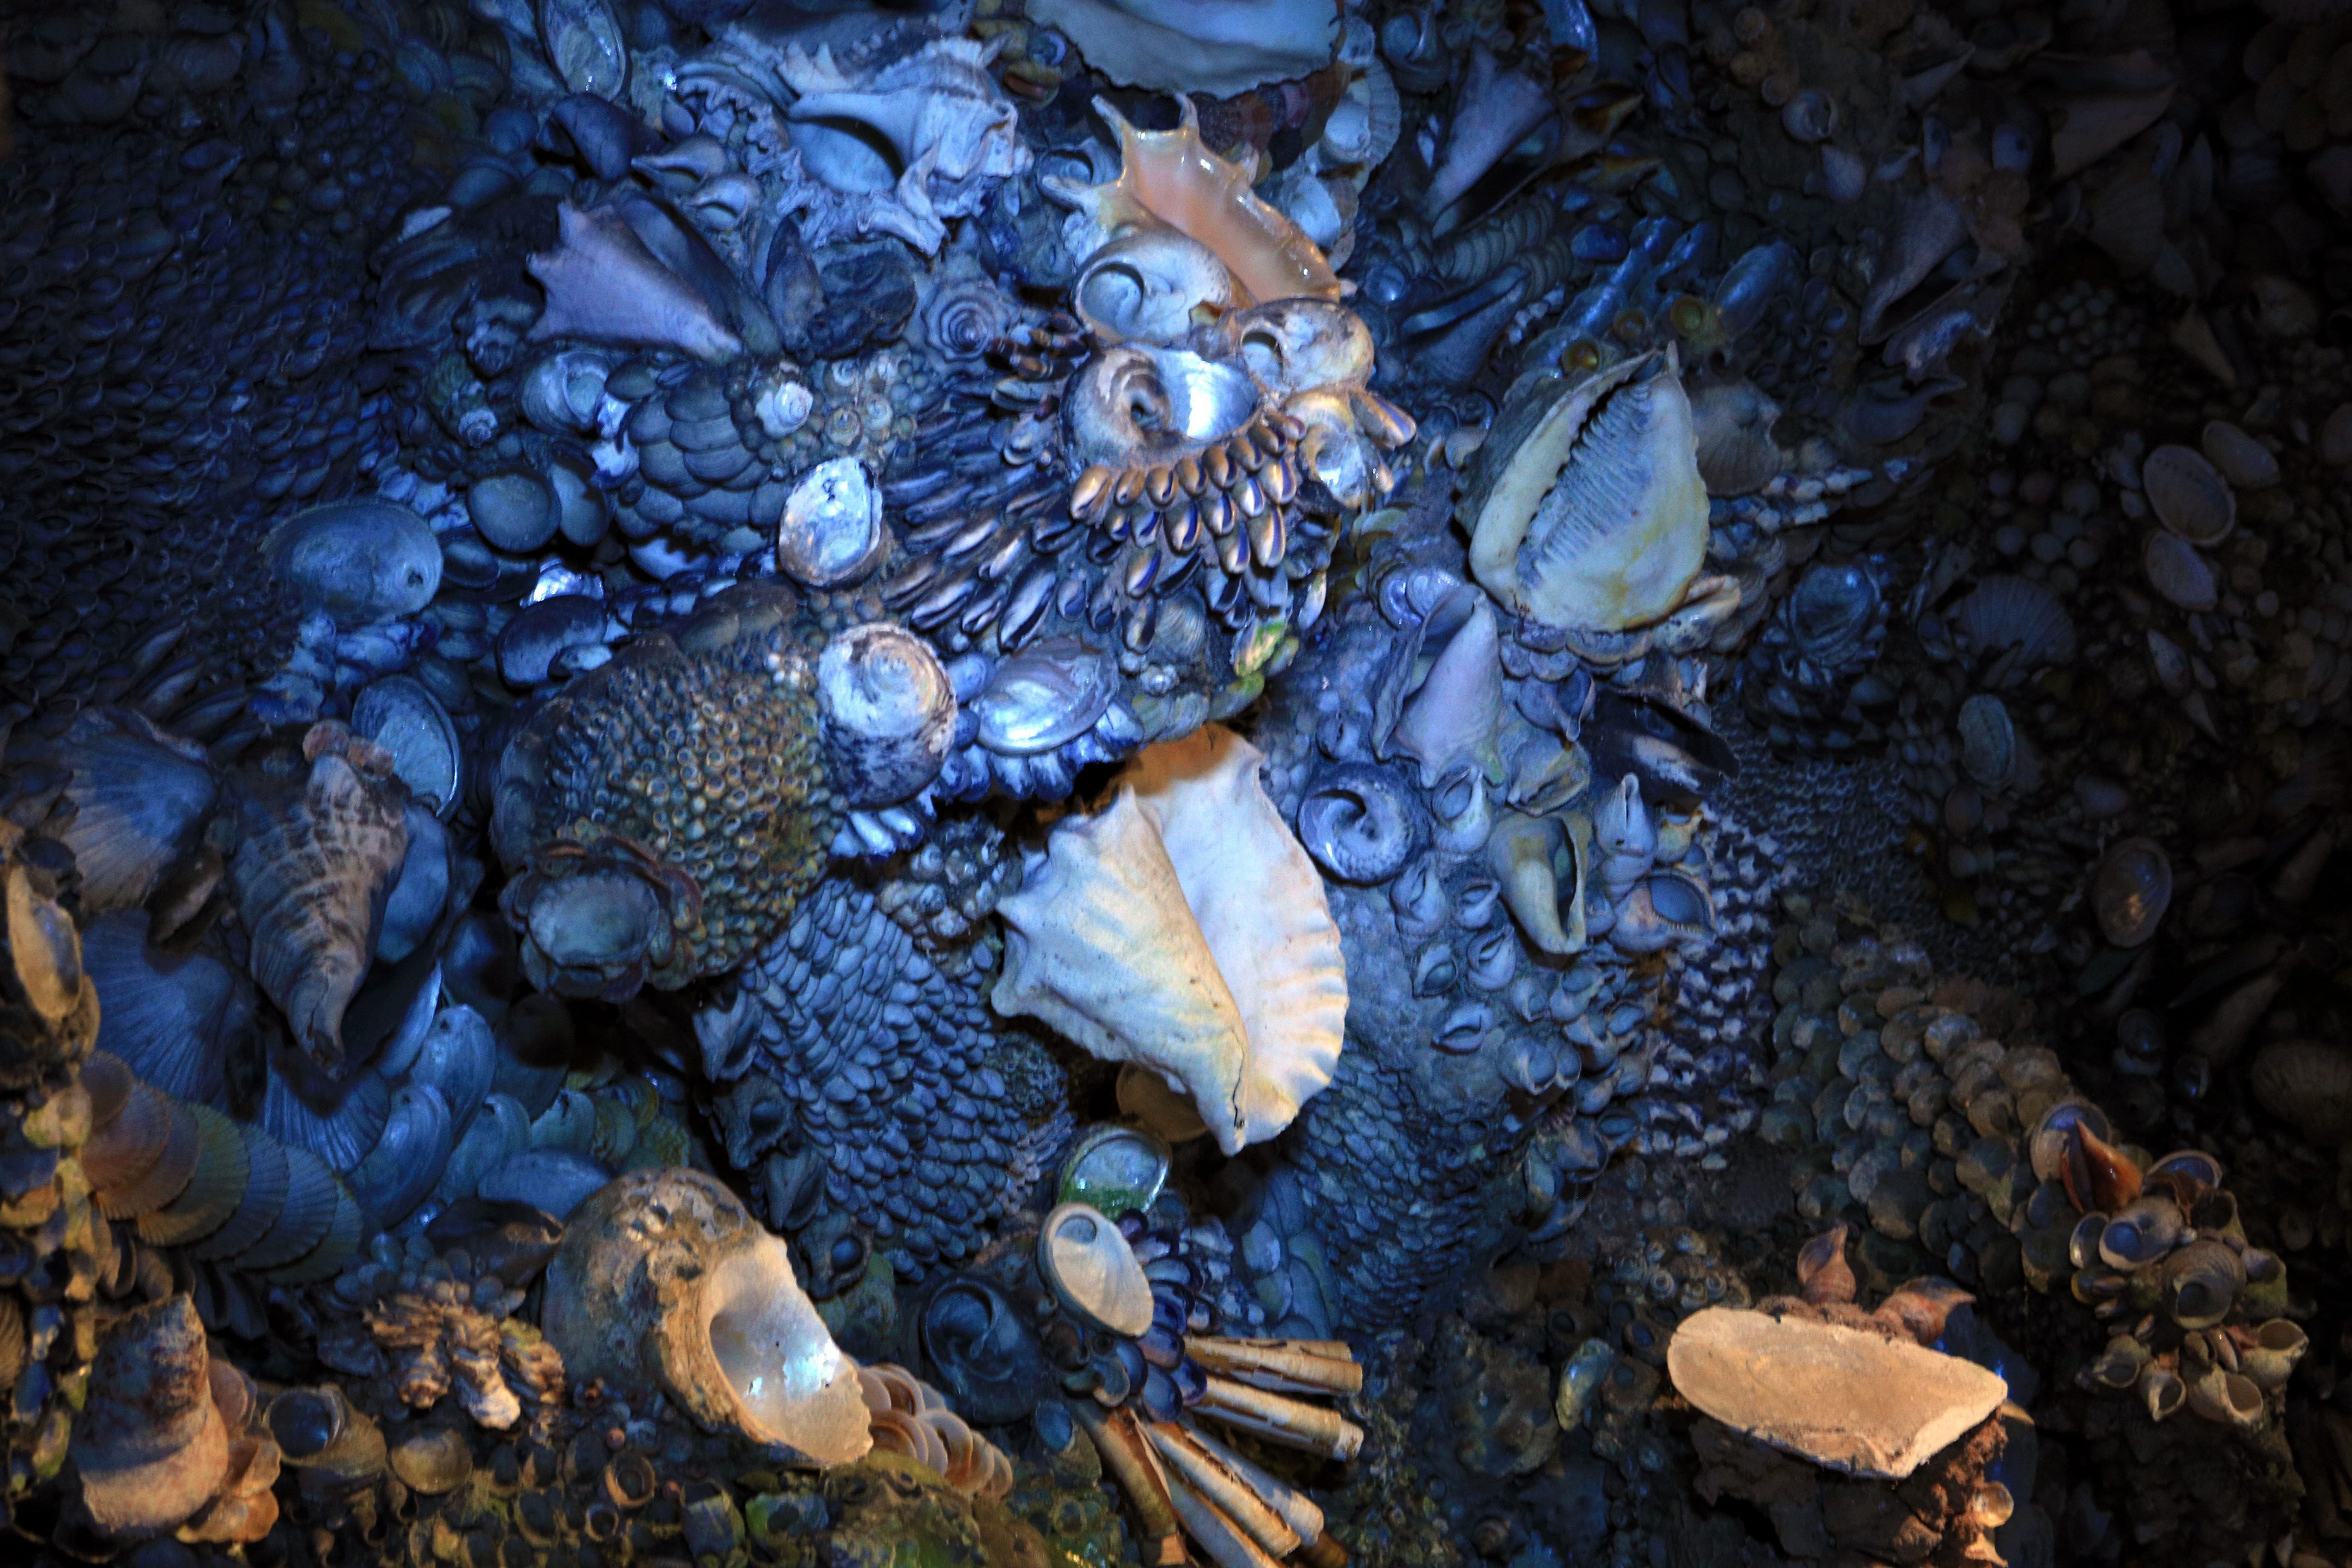 The grotto is lined with shells from all over the world and Bristol Diamond quartz